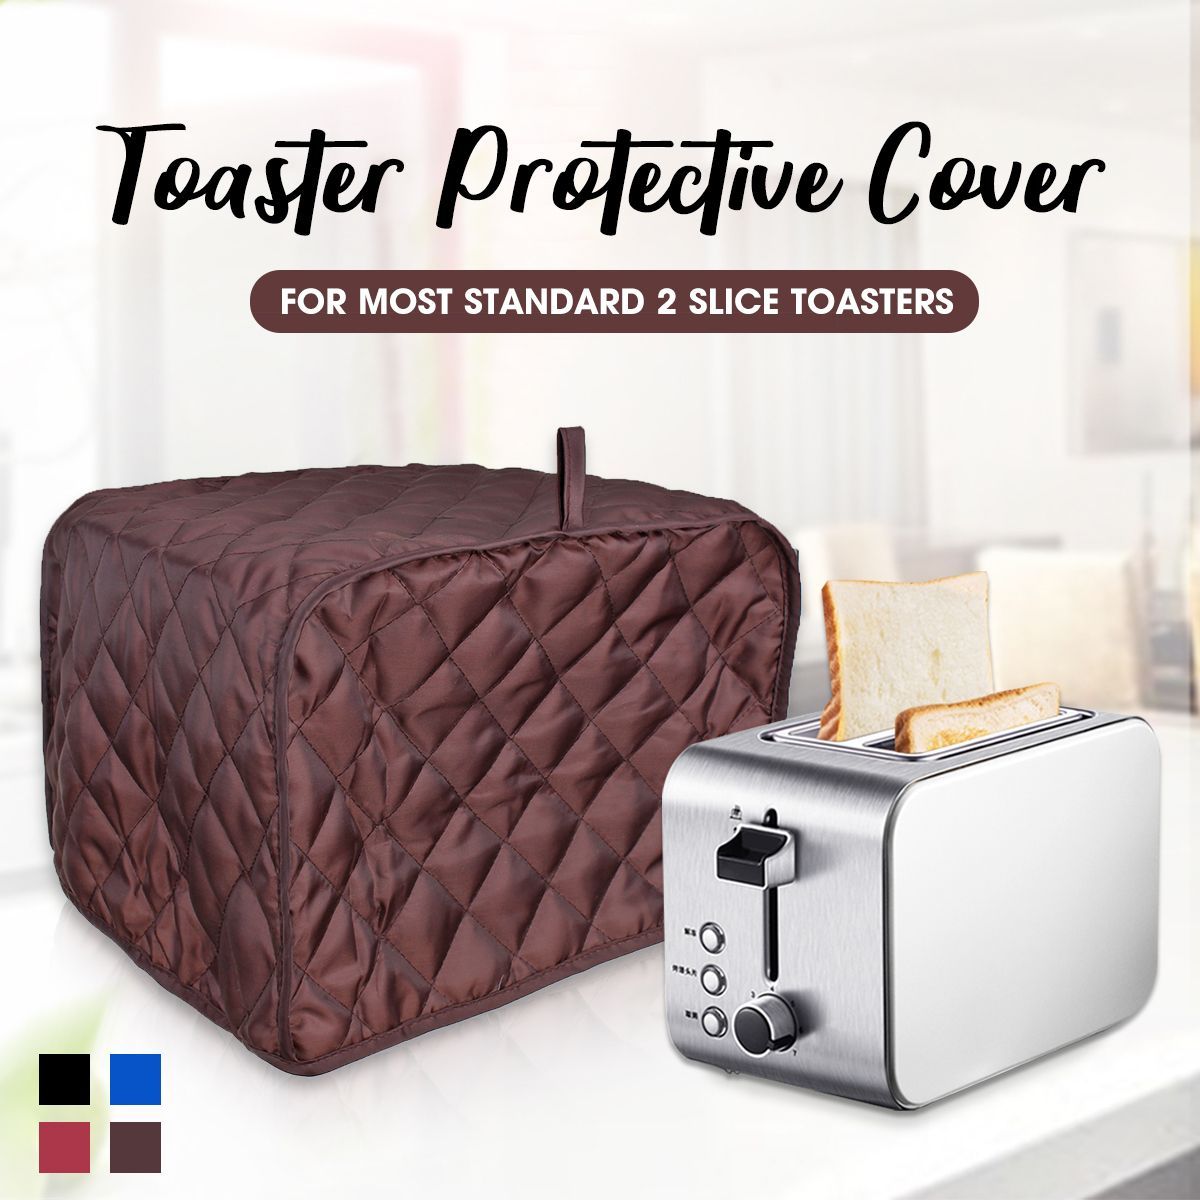 2-Slice-Toaster-Bakeware-Cover-Protector-Dustproof-Kitchen-Clean-Tool-4-Color-1520796